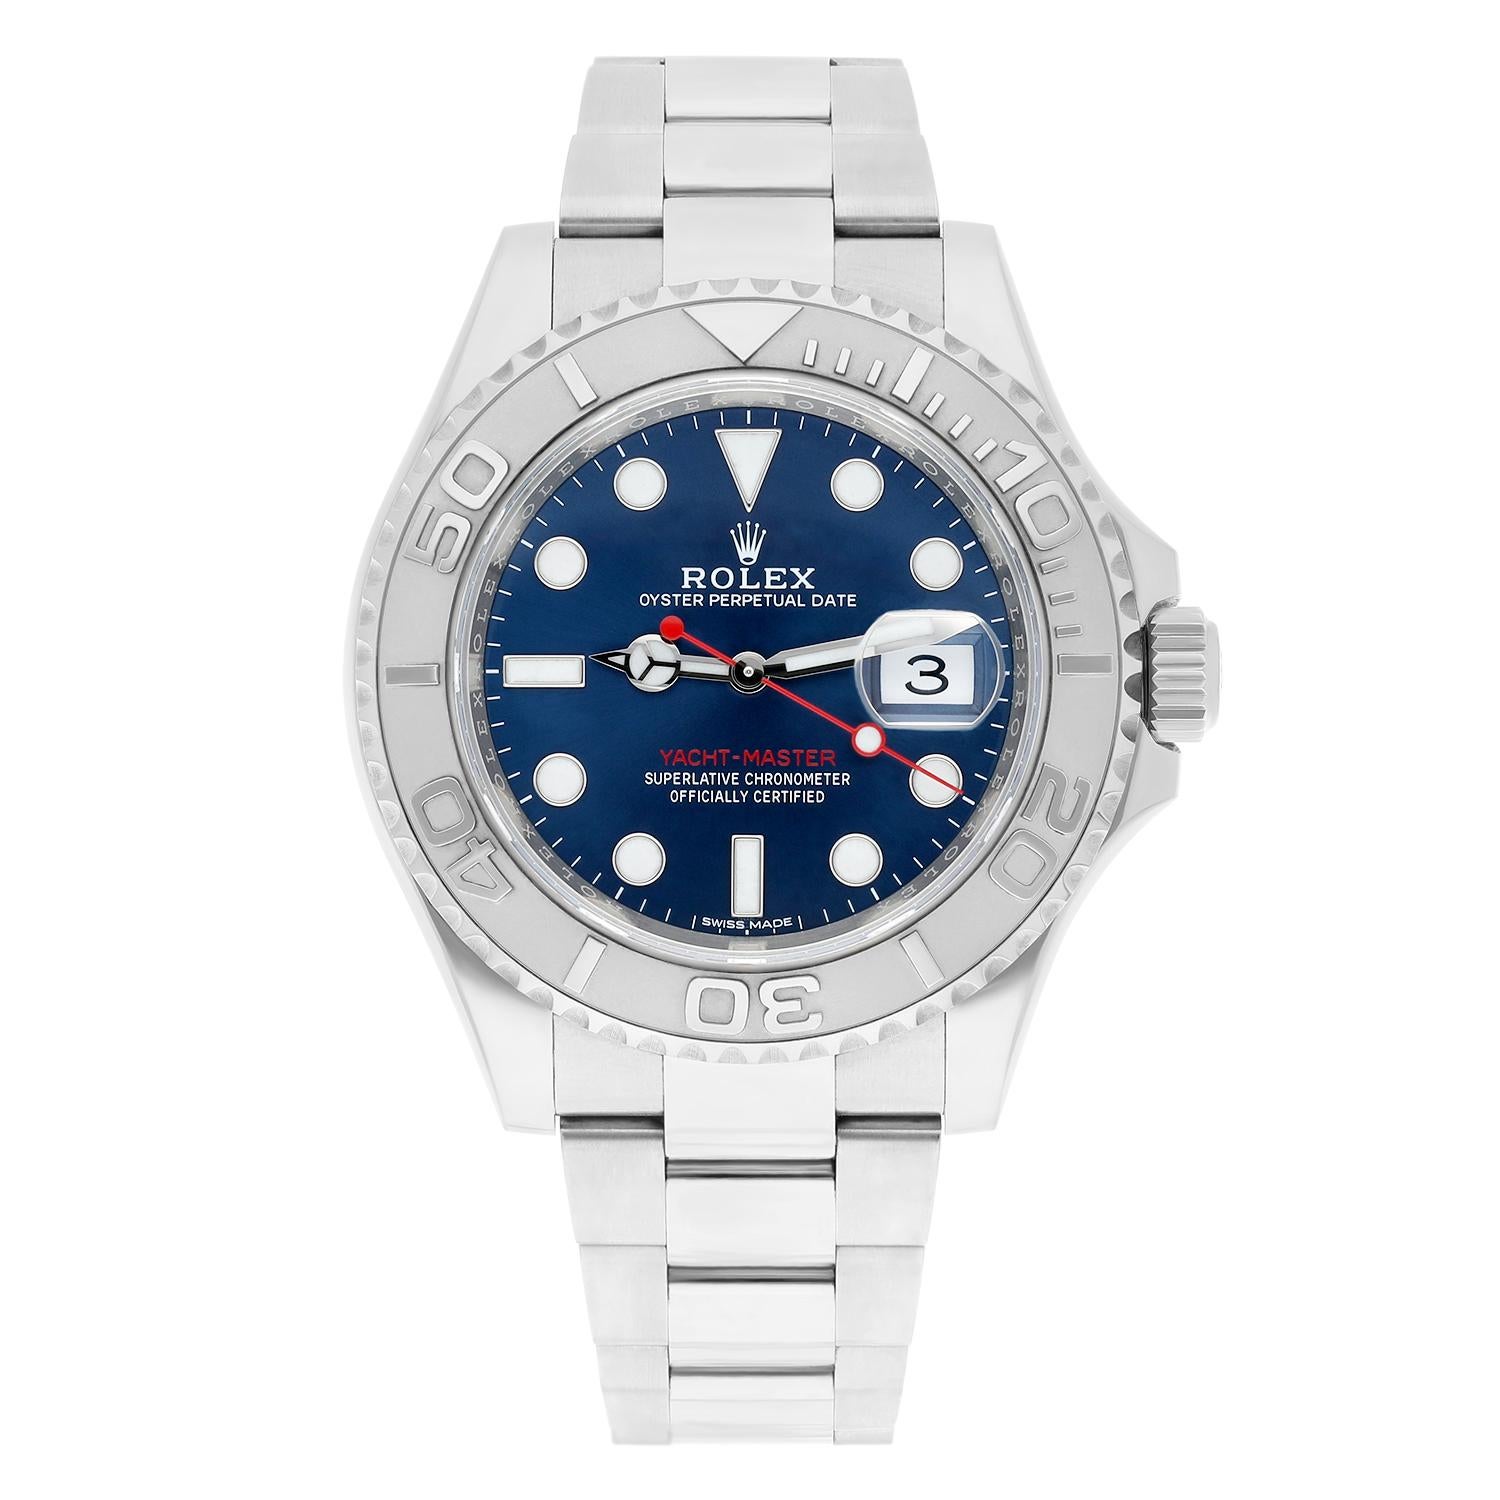 Rolex Yacht-Master 116622 Silver Oyster Bracelet with Blue Dial Red Hand

This watch has been professionally polished, serviced and does not have any visible scratches or blemishes. It is a genuine Rolex which has been inspected to verify